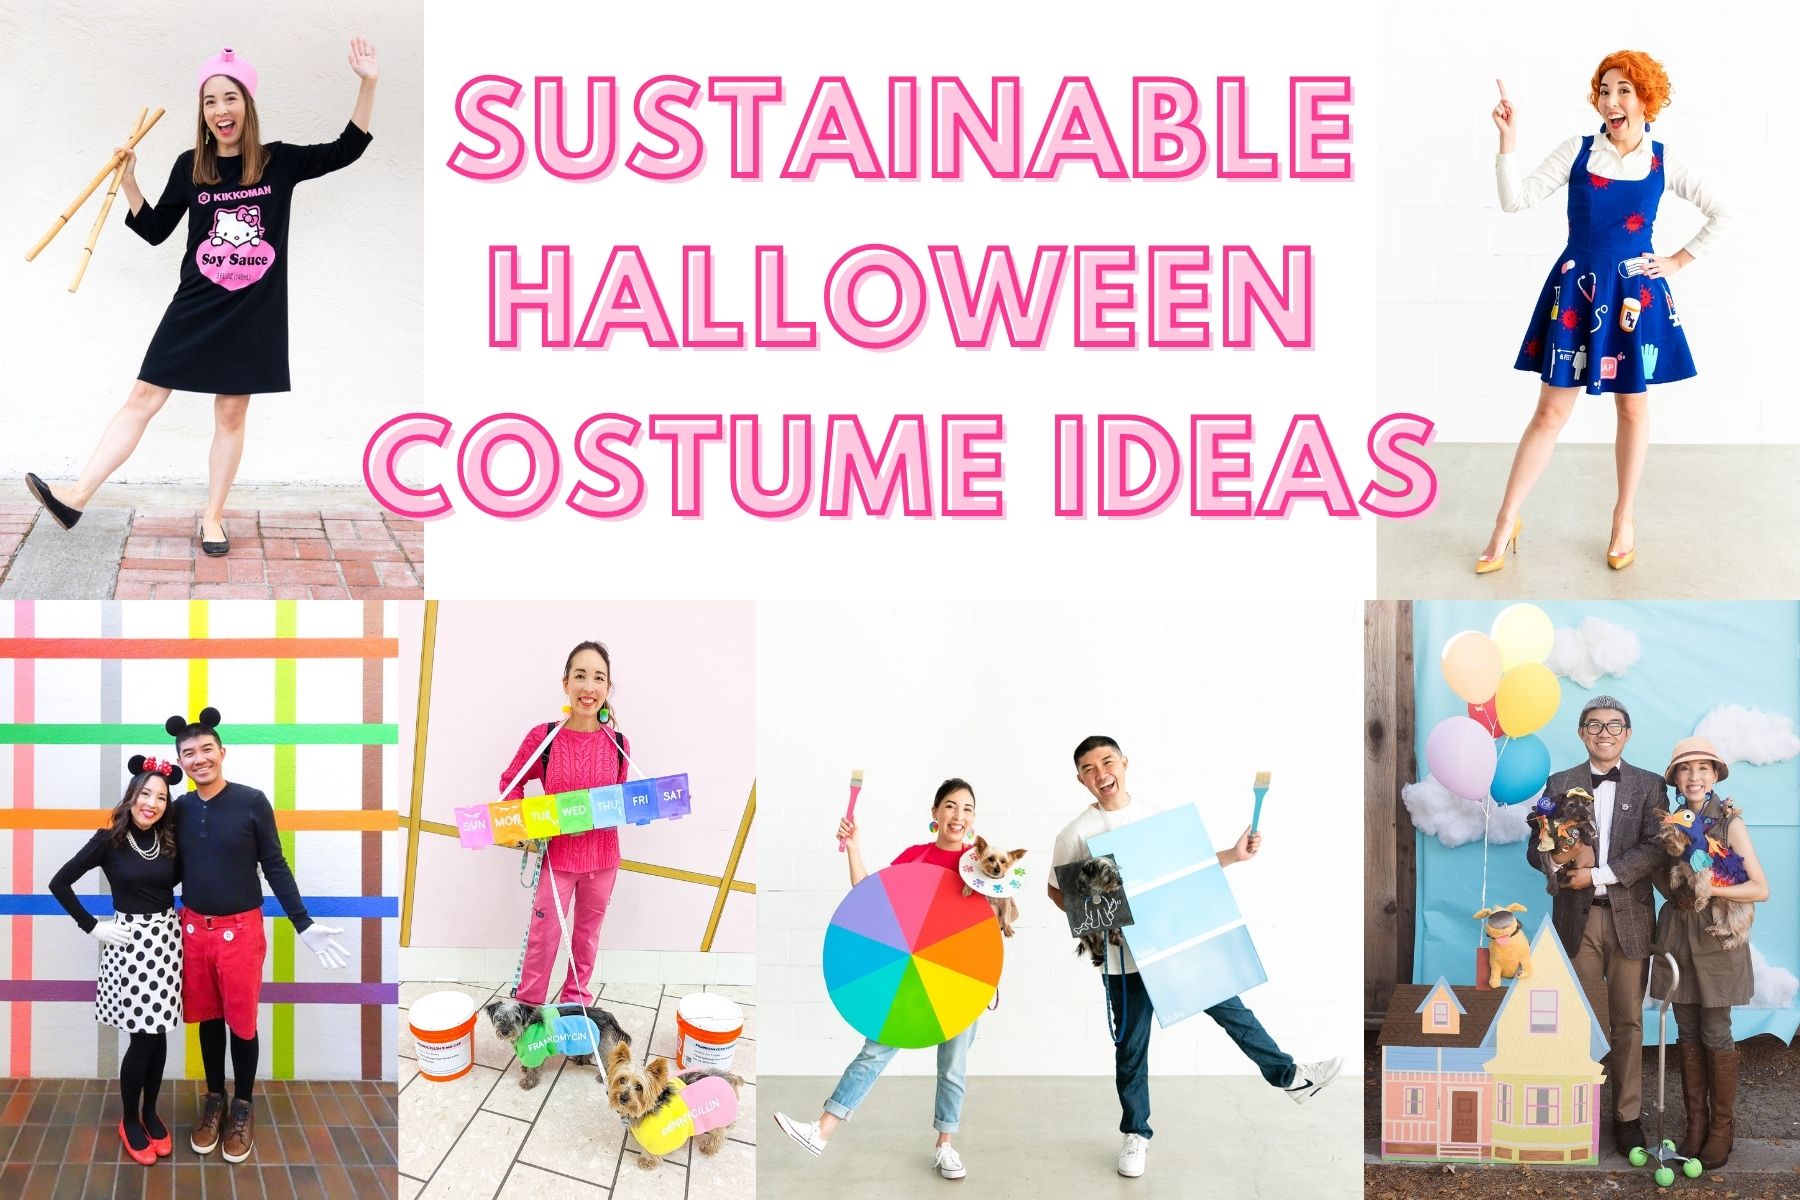 A cover photo titled "Sustainable Halloween Costume Ideas" featuring photos of different costumes made by Blaire of Freshly Fuji.